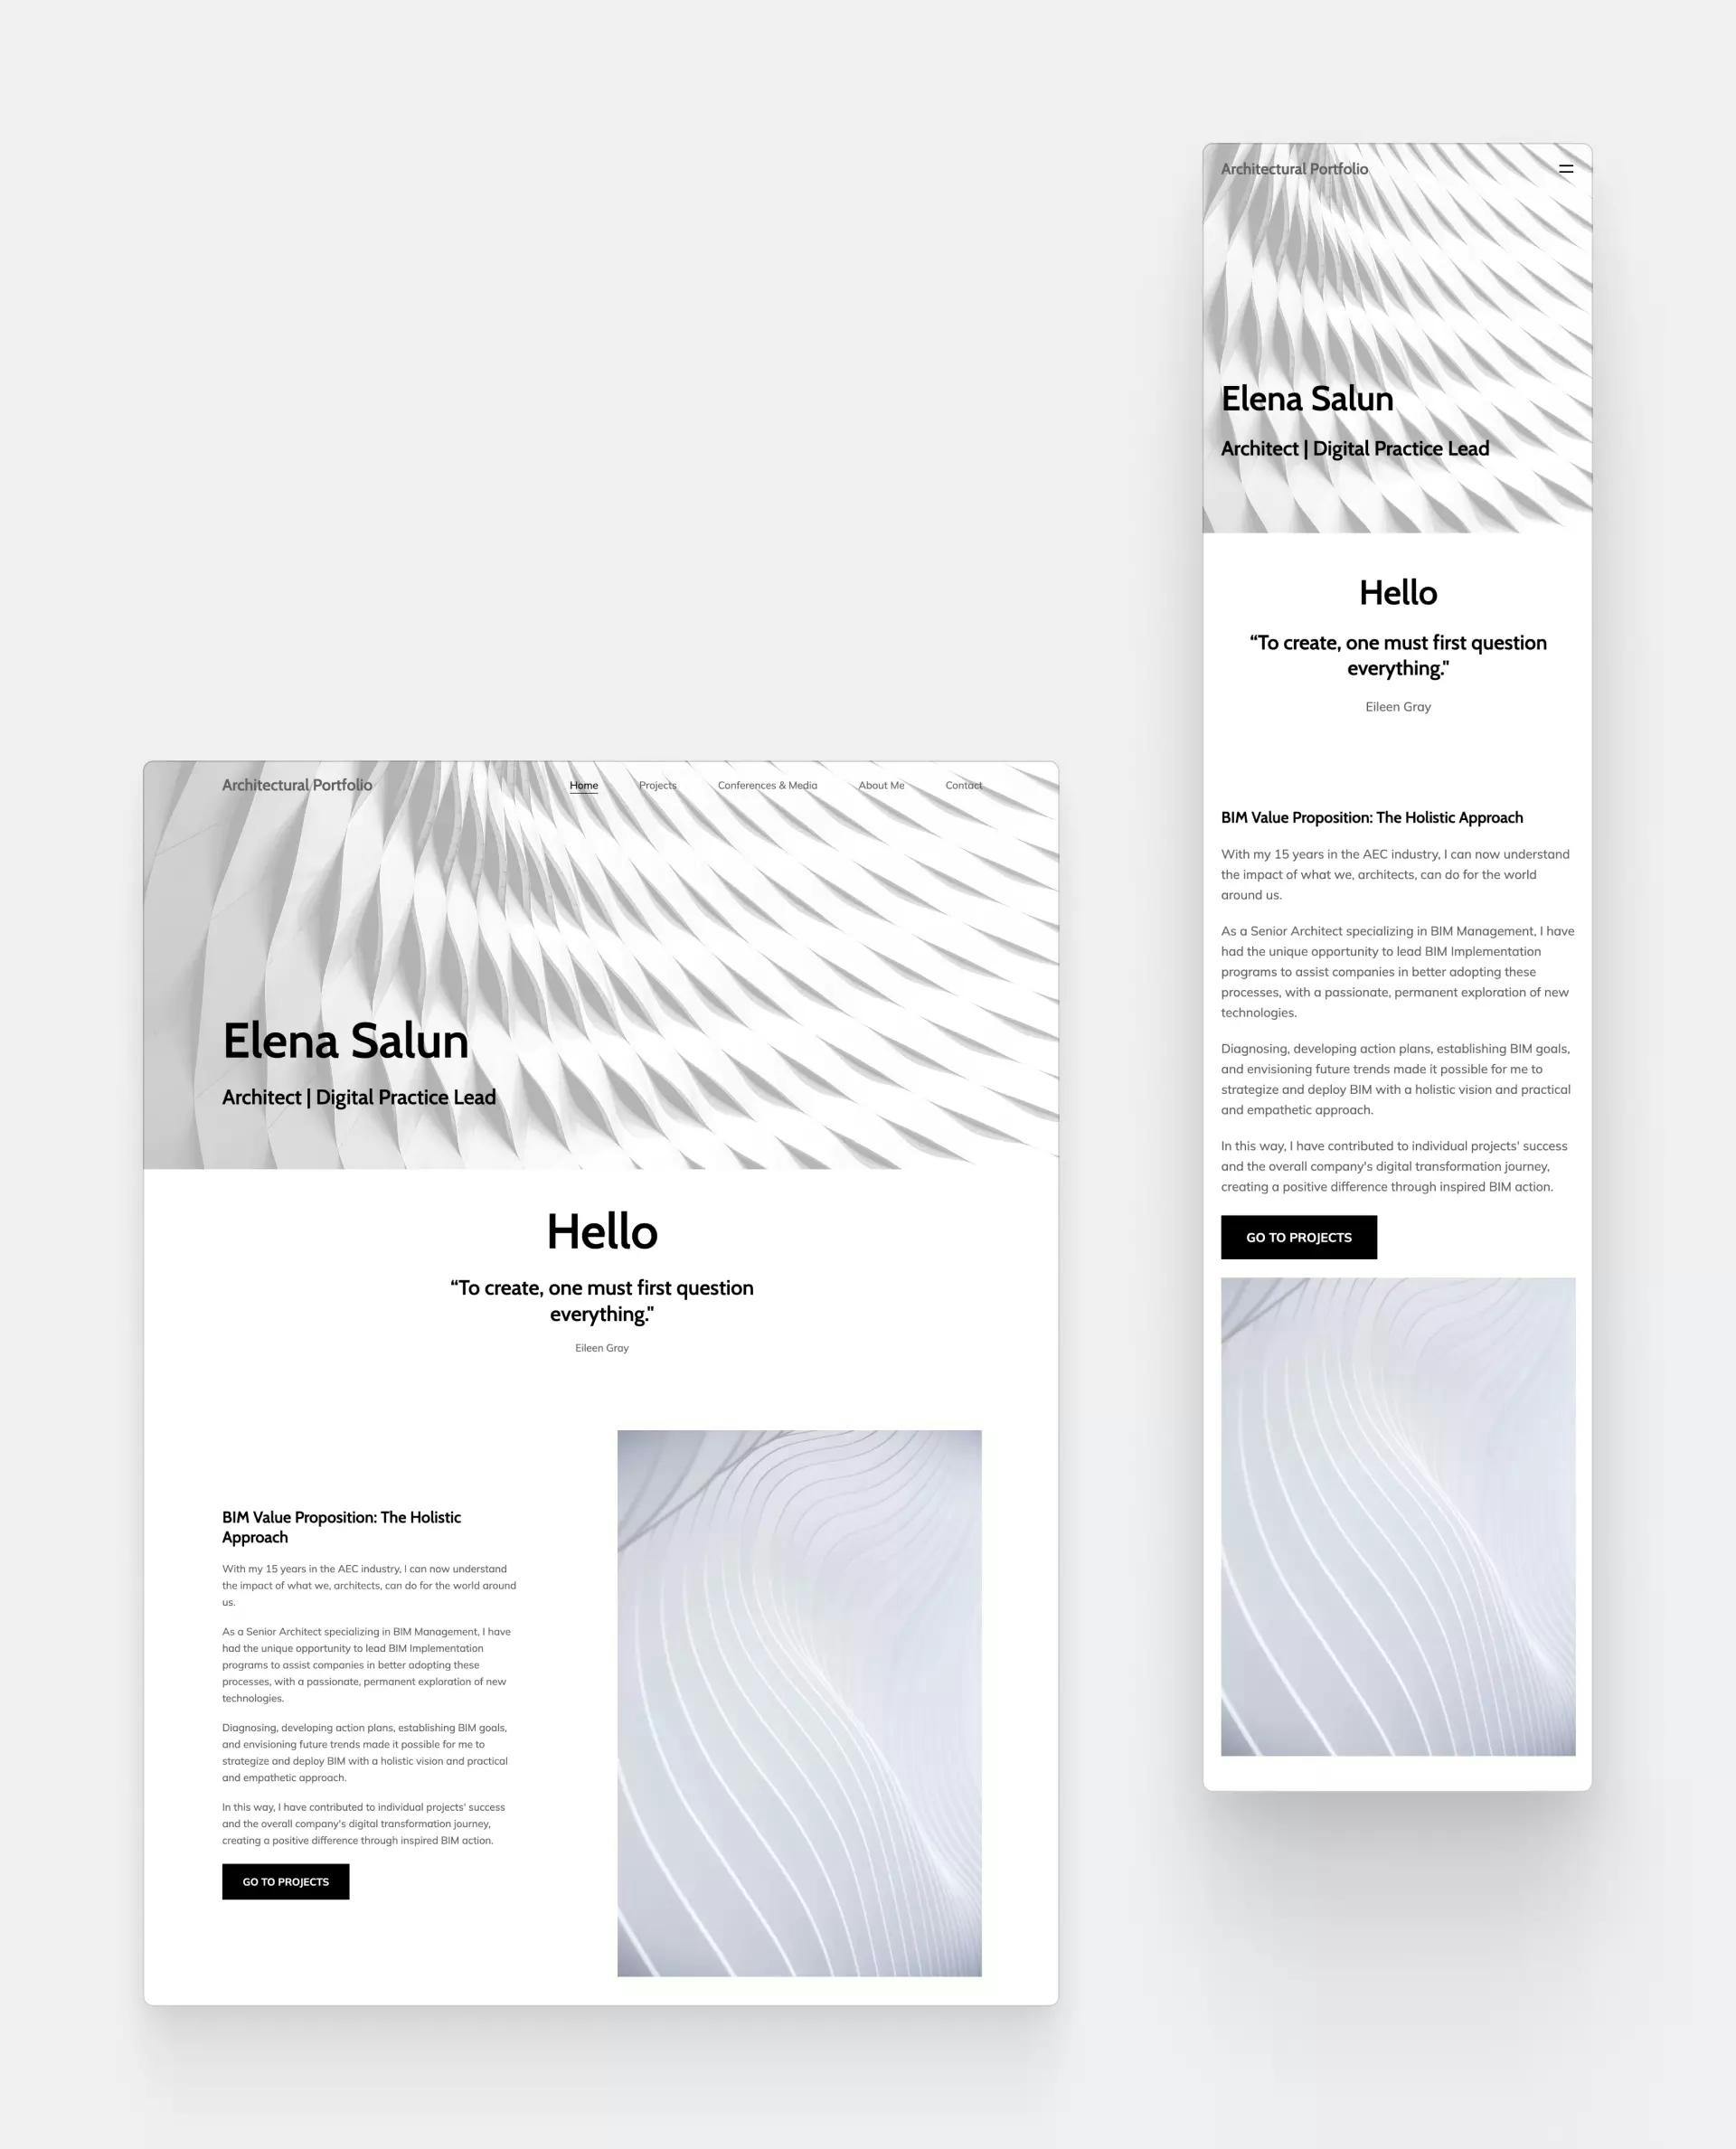 Elena Salun's architecture website design. A desktop and a mobile view next to one another